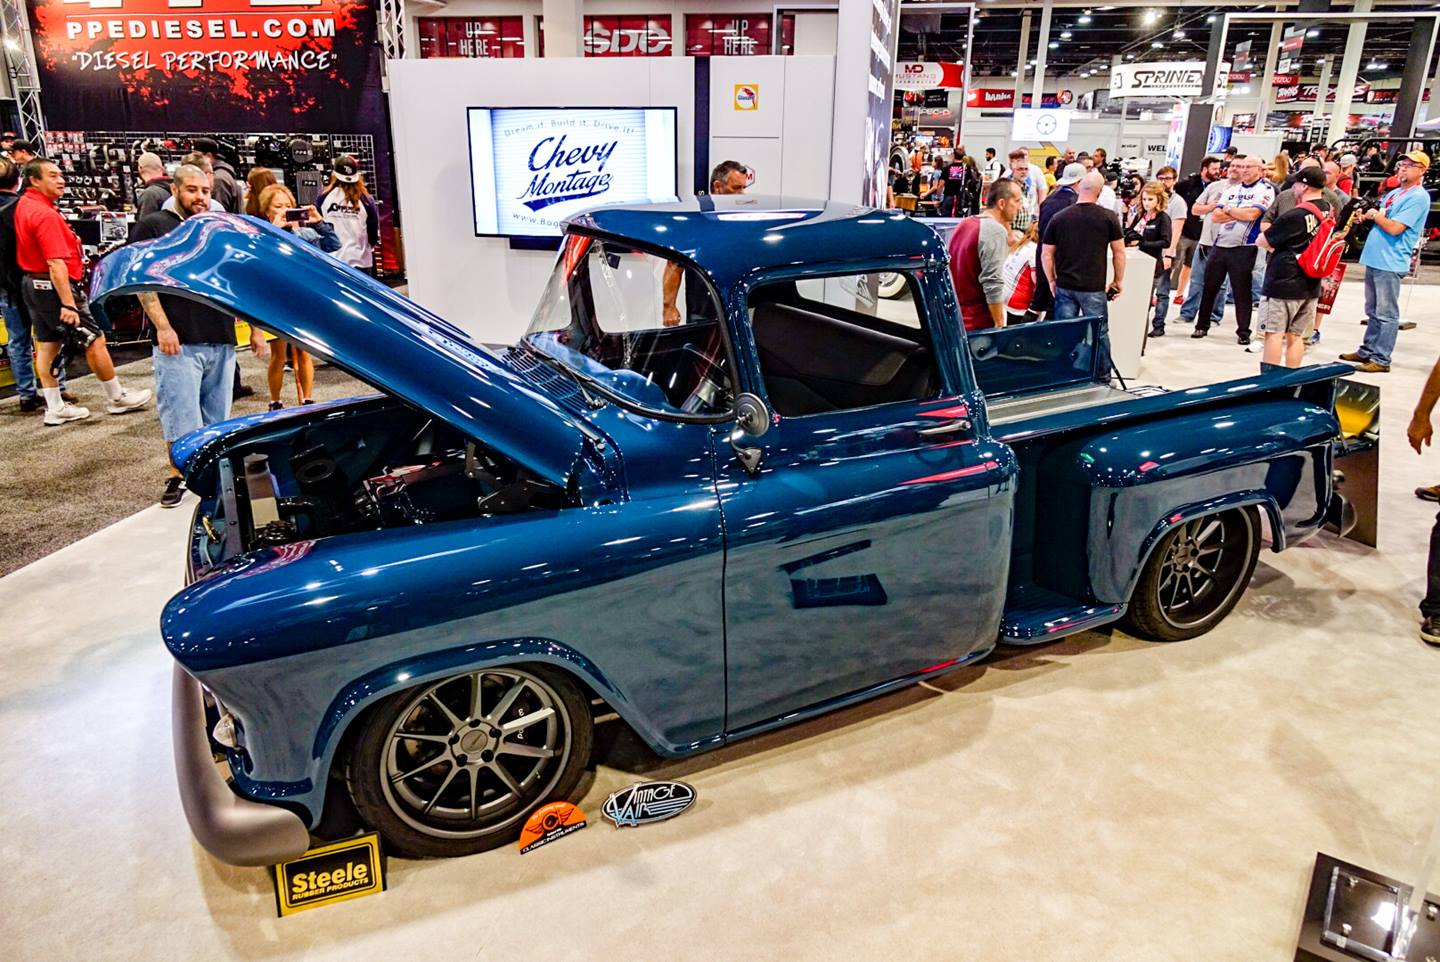 Chevy Montage on display at SEMA 2017